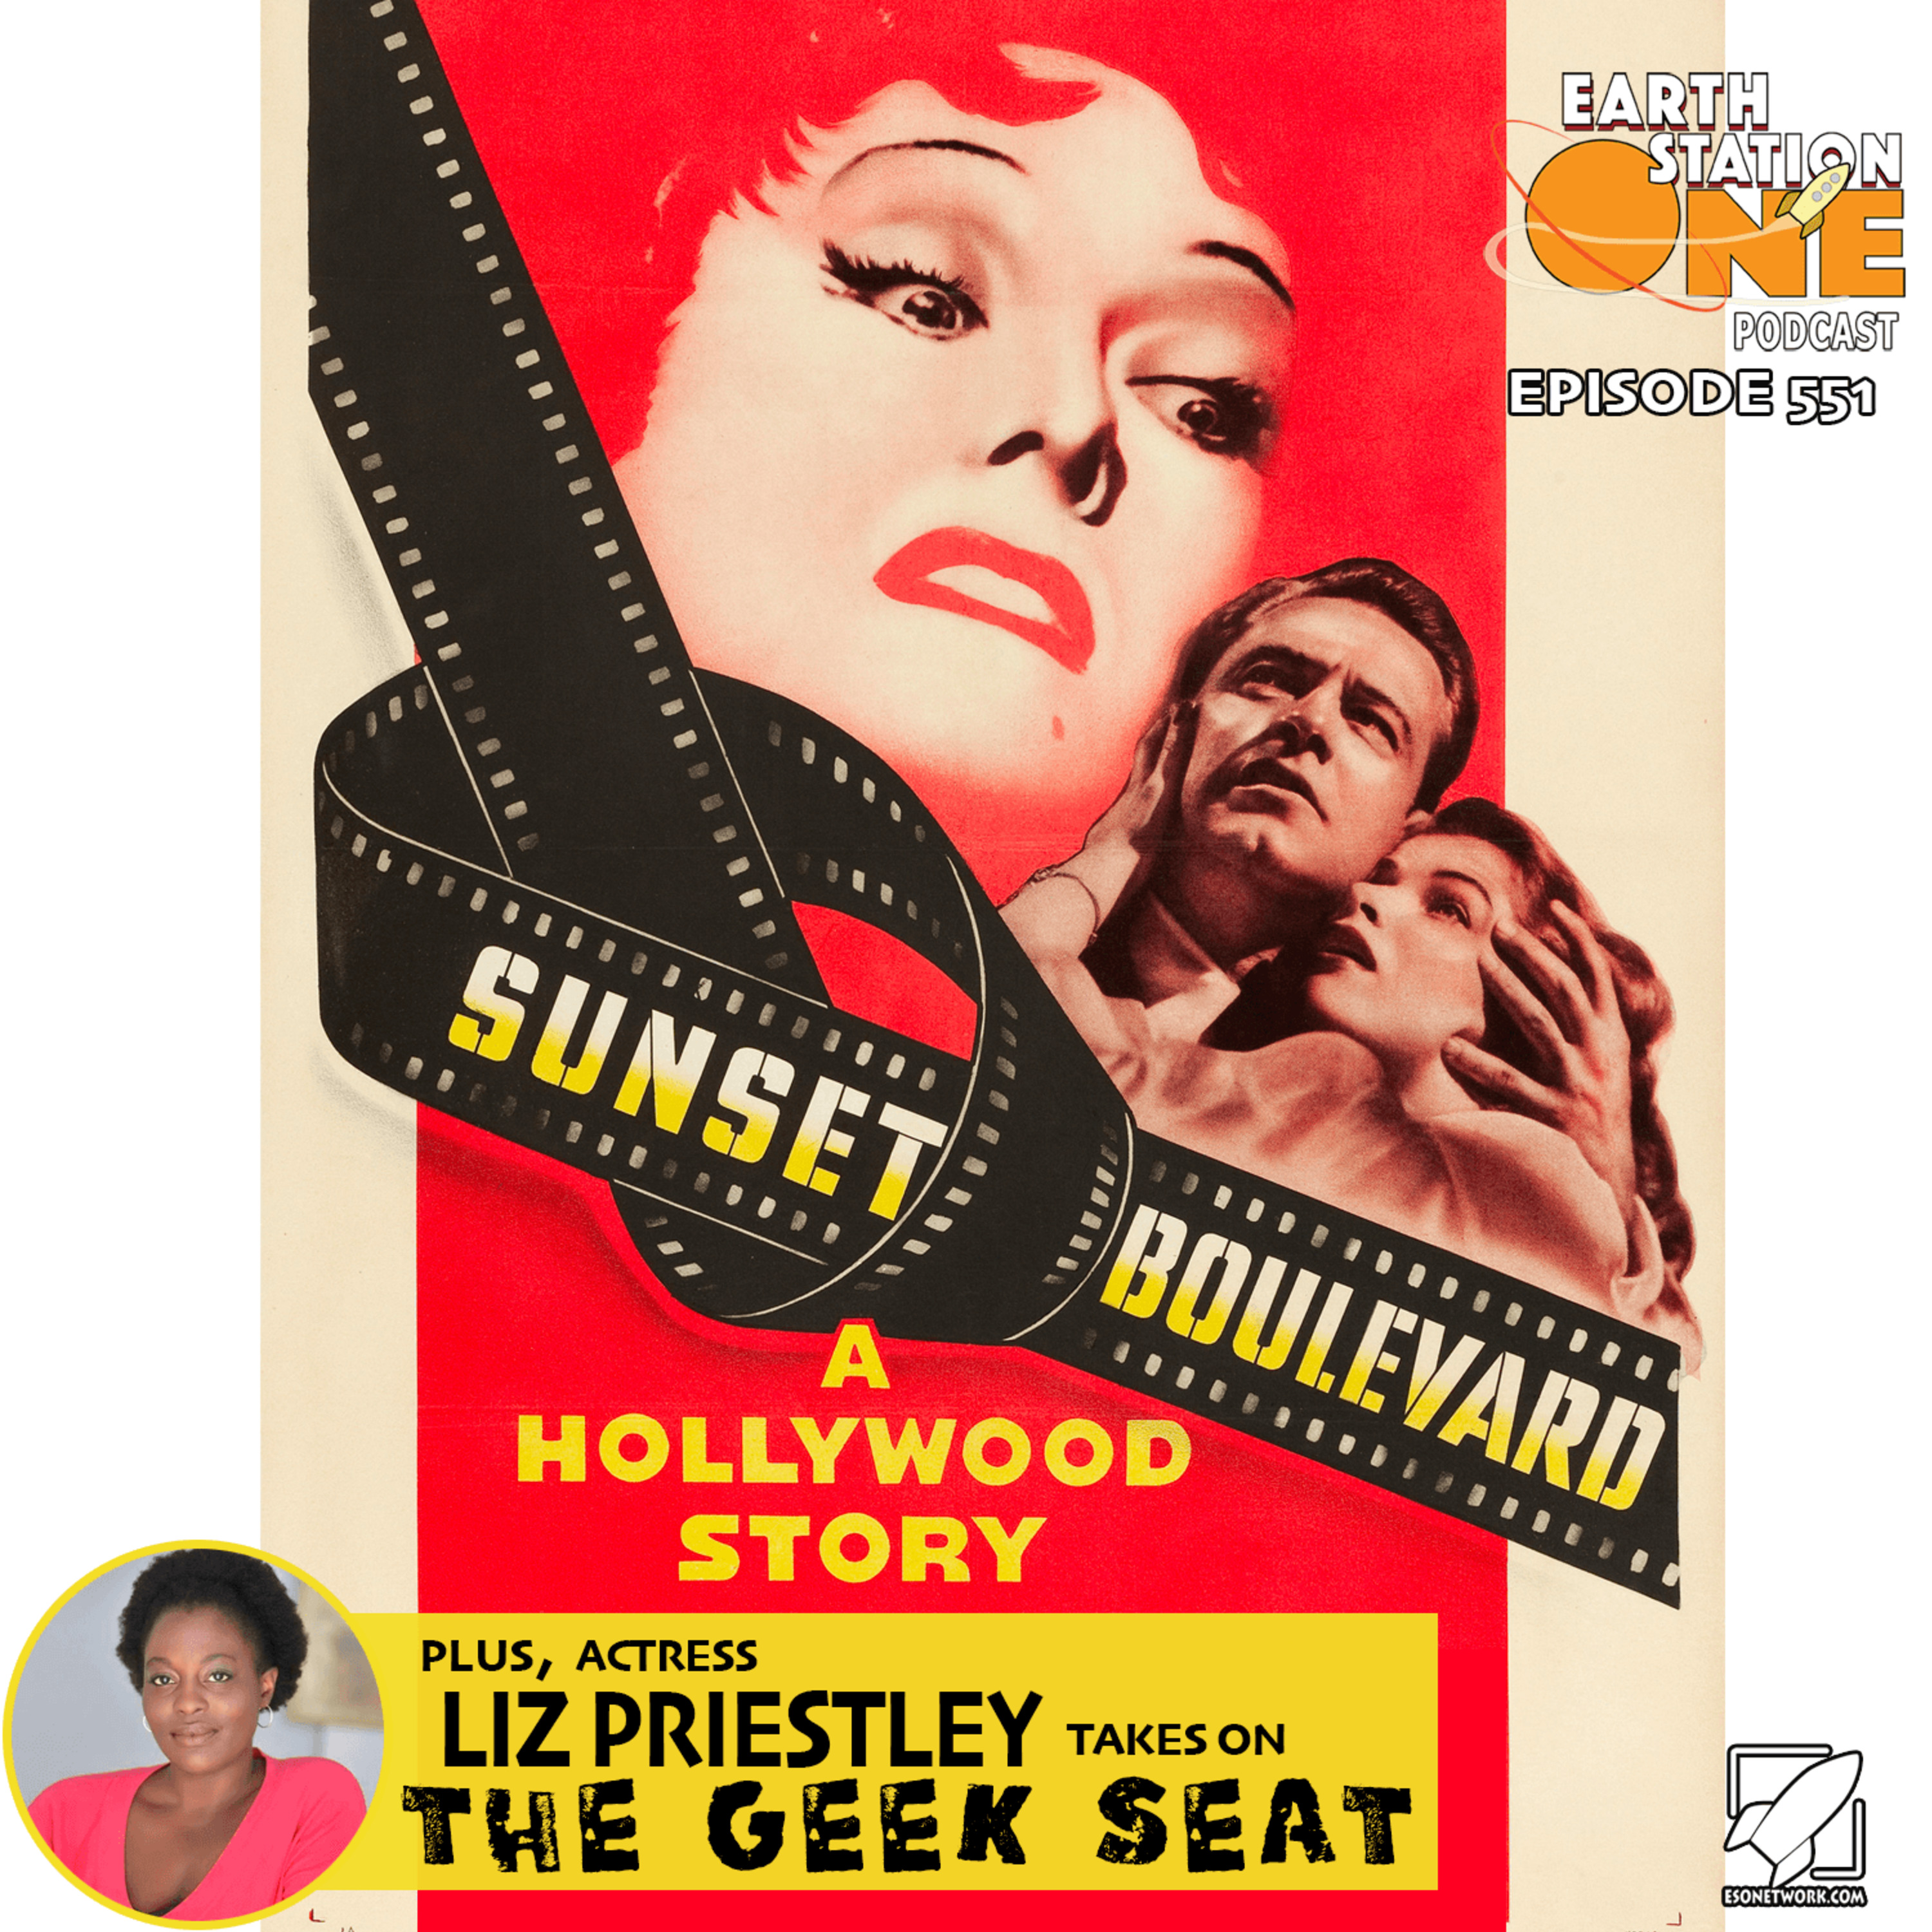 The Earth Station One Podcast - An LGBT Look Sunset Boulevard